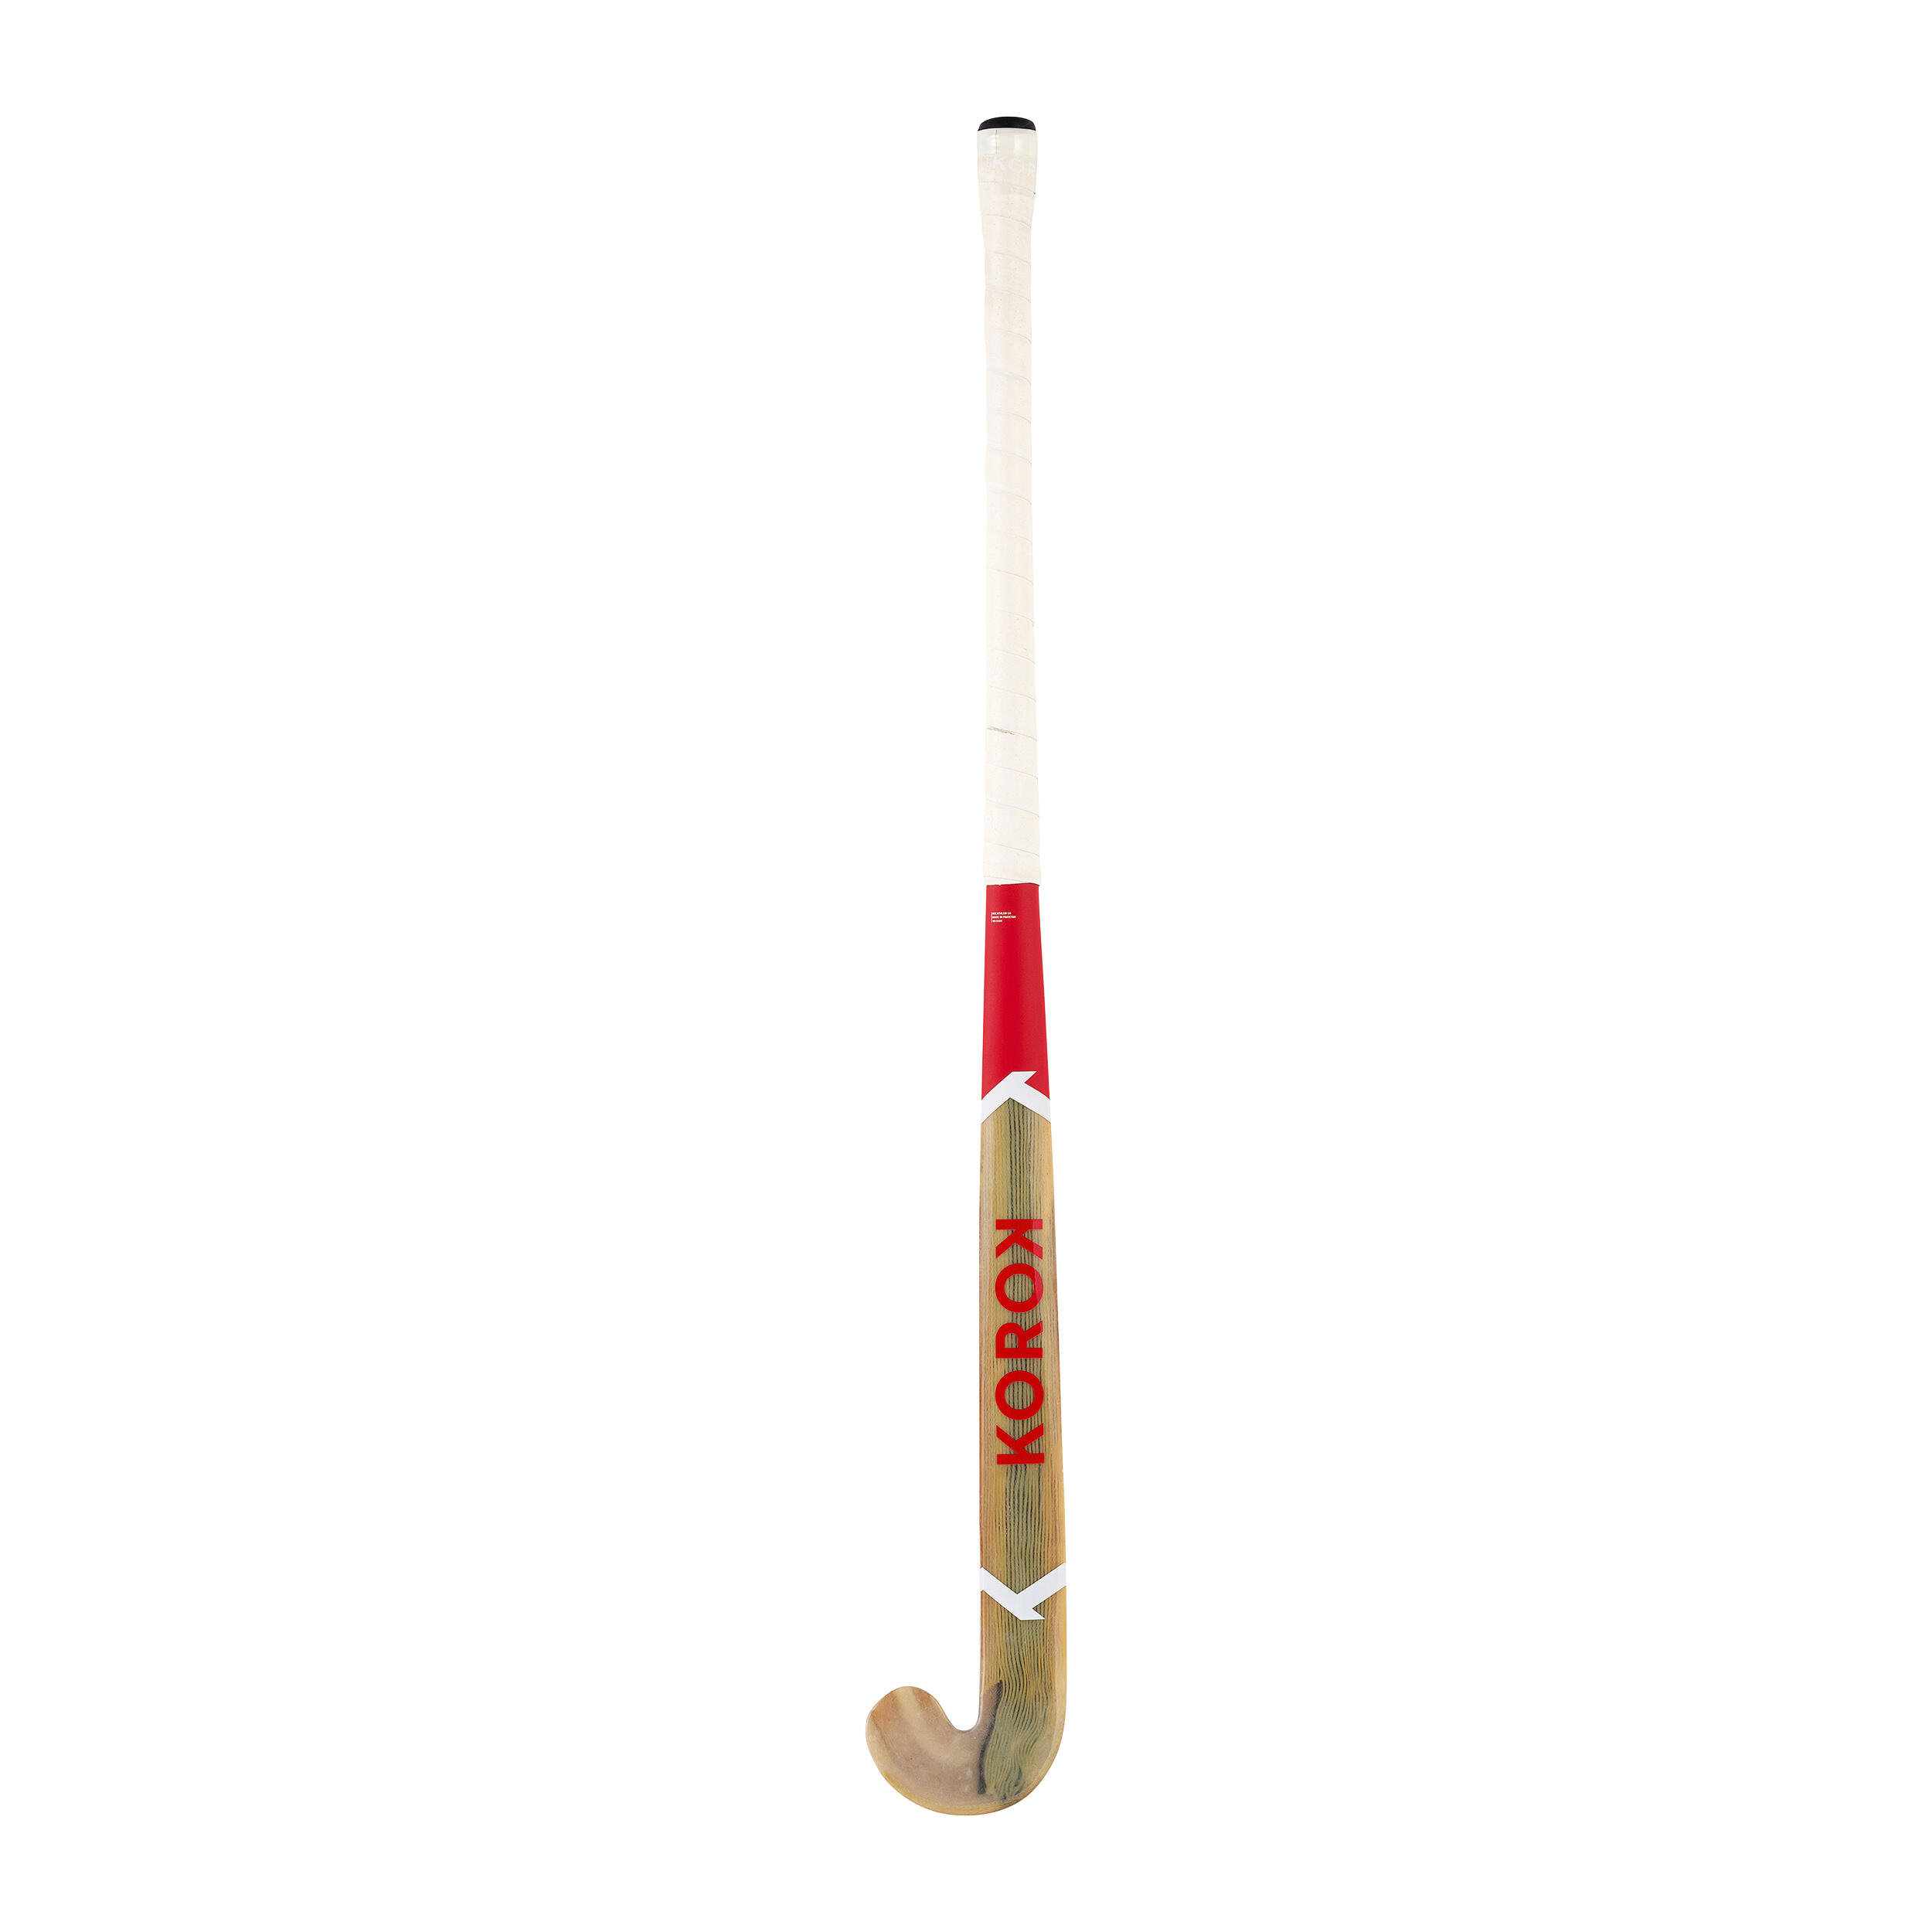 Adult Advanced Wood and 30% Carbon Low Bow Indoor Hockey Stick FH930W - Wood/Red 5/8